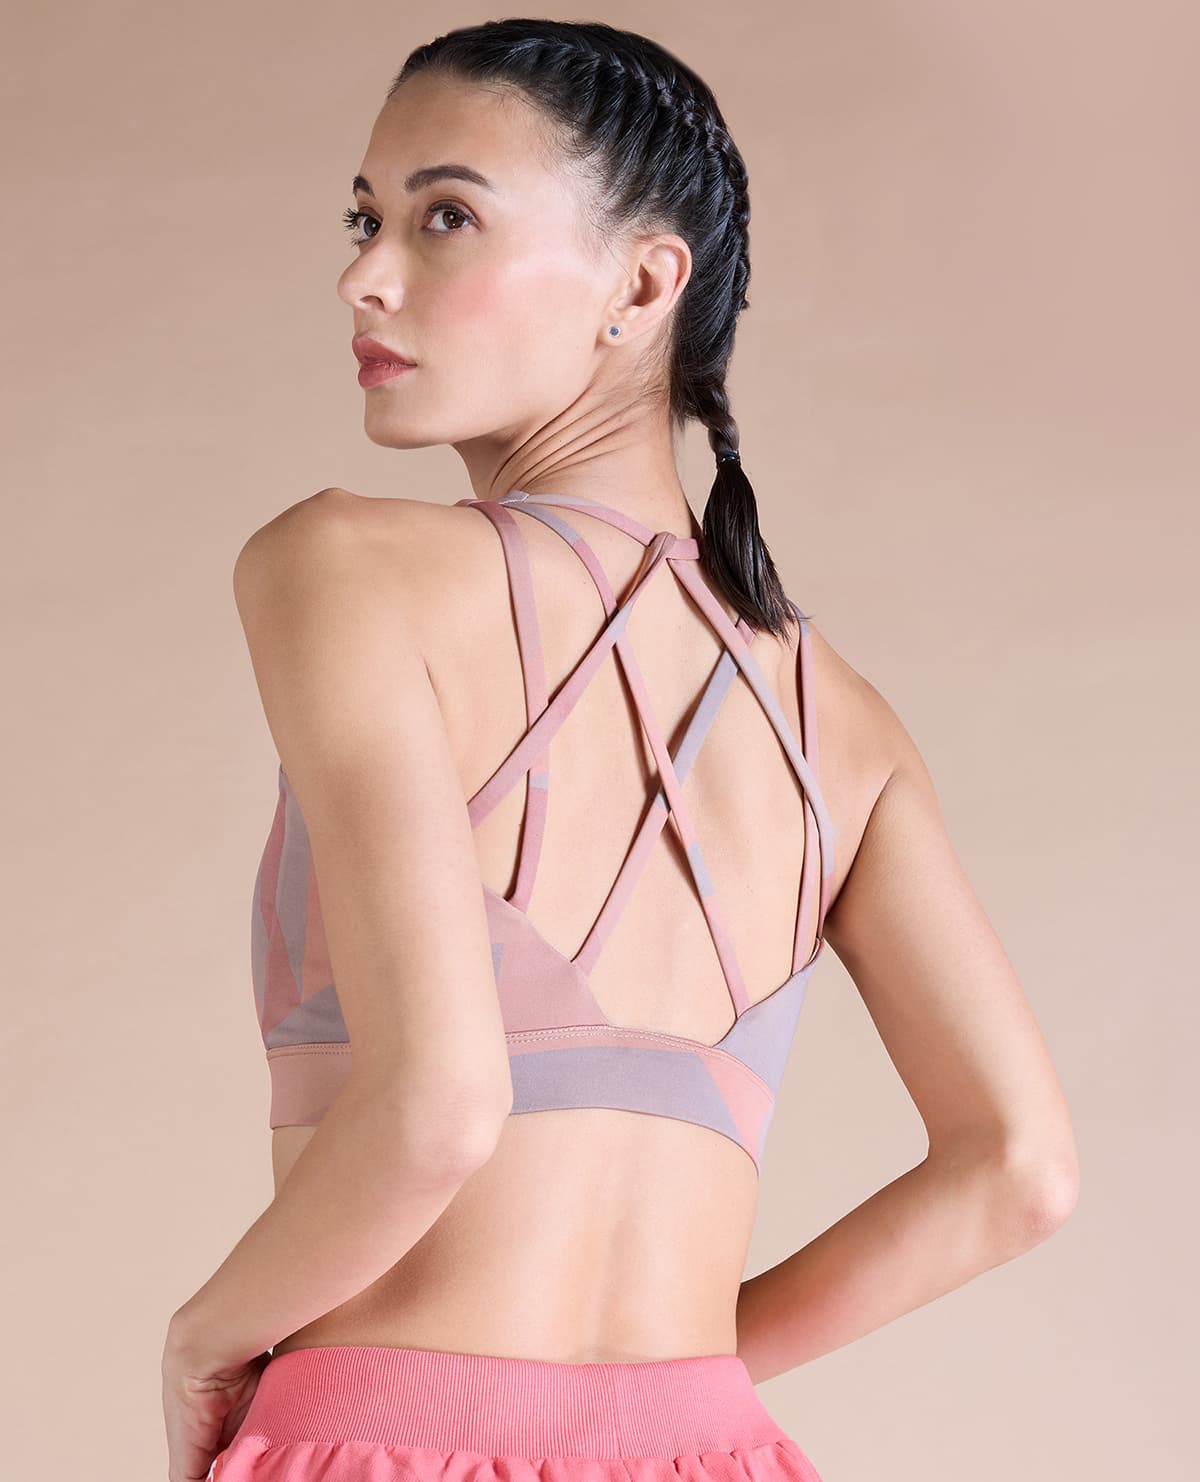 Buy Kica Mid Support Strappy Bra And High Waisted Leggings For Gym